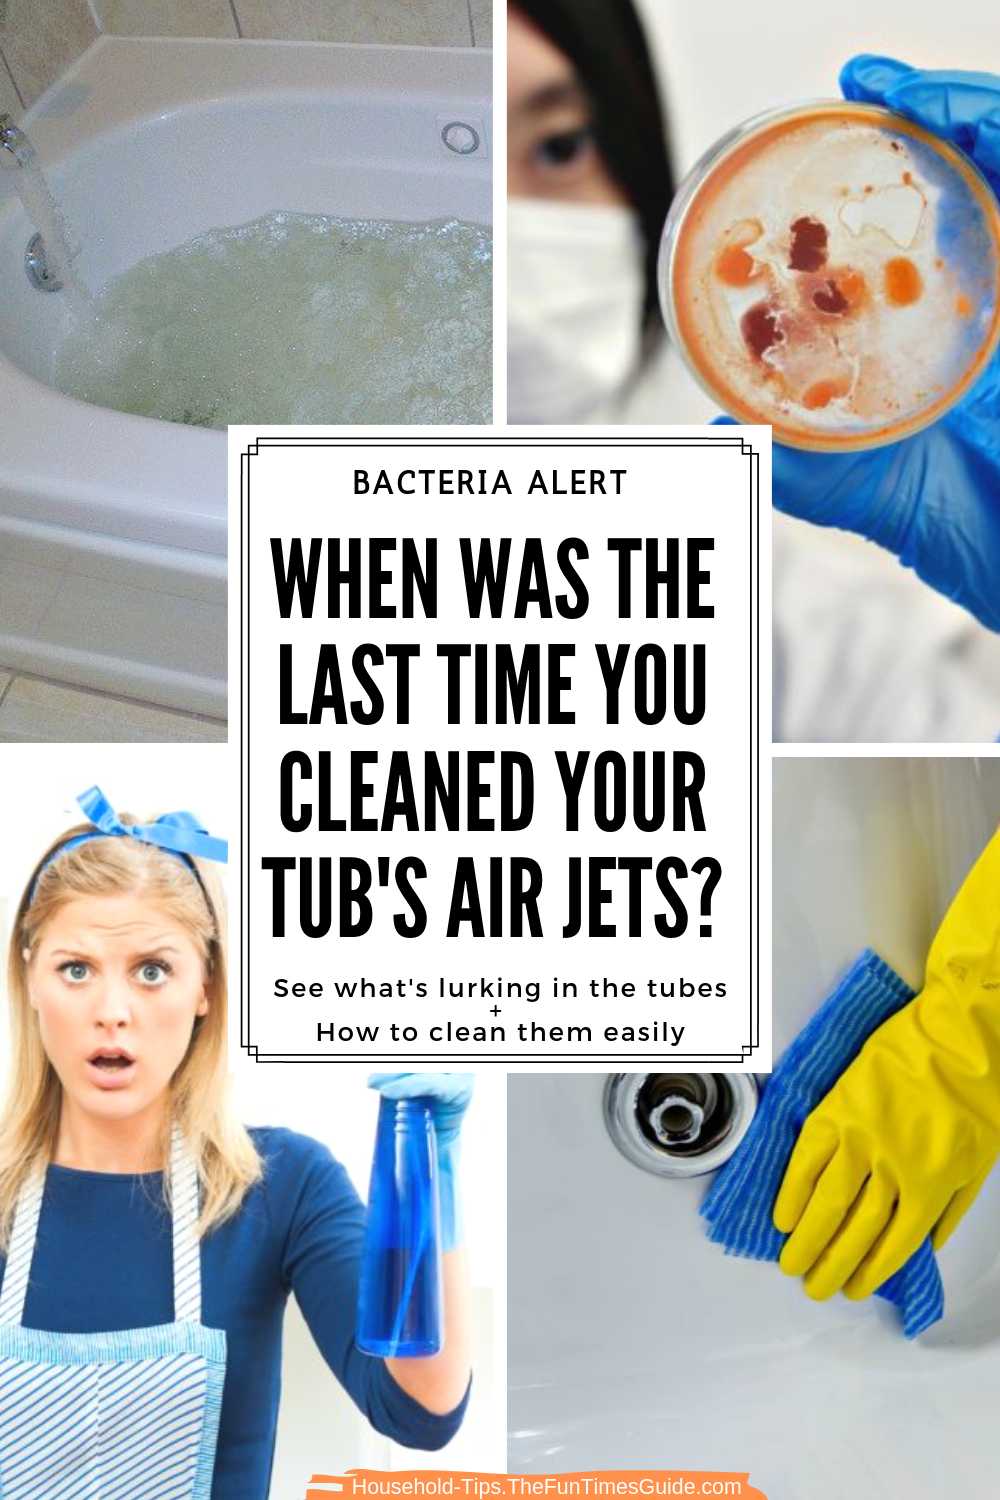 Diy Jetted Tub Cleaner The Bacteria, How To Remove Bathtub Jet Covers